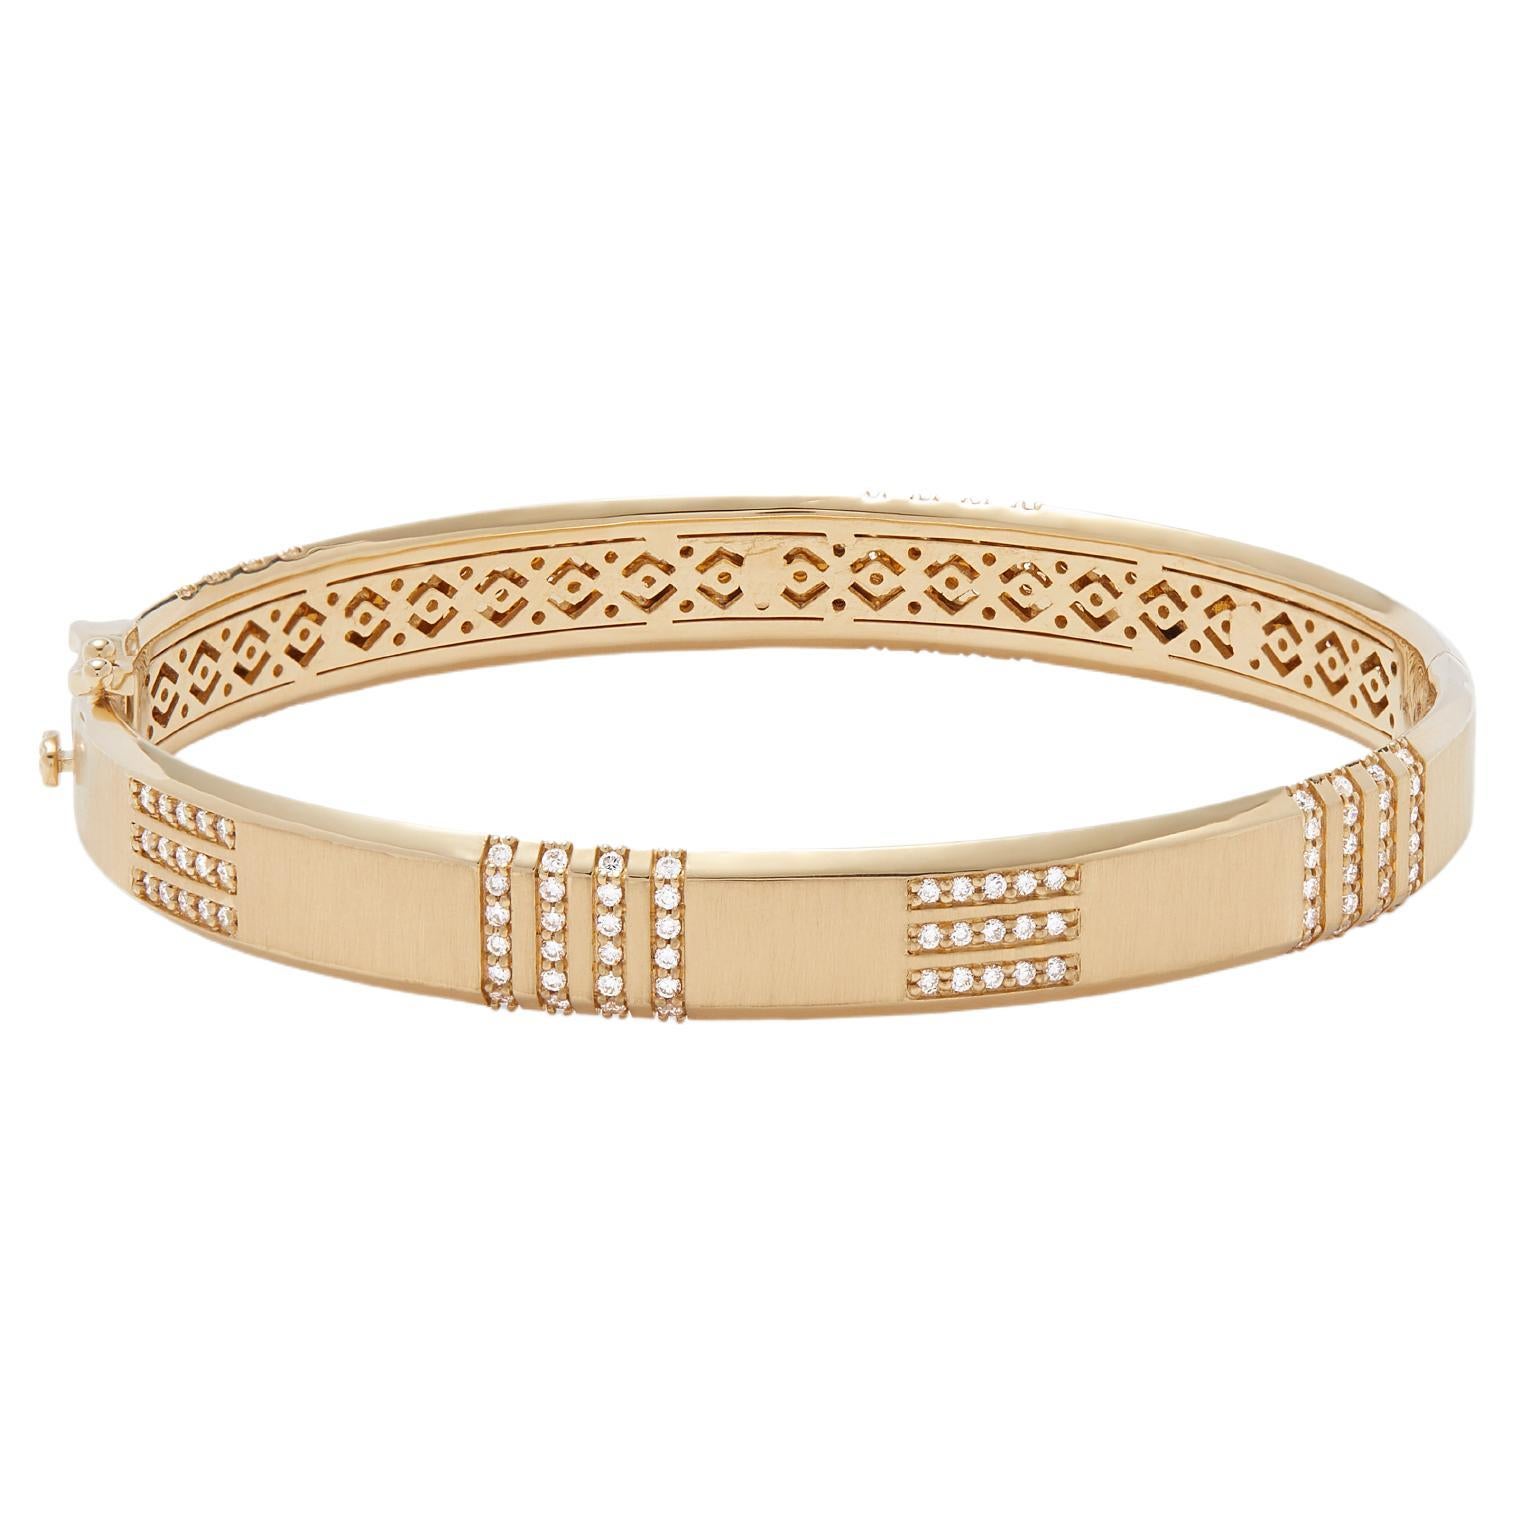 Heart The Stones by Halle Millien Diamond and 18K Yellow Gold Bangle Bracelet